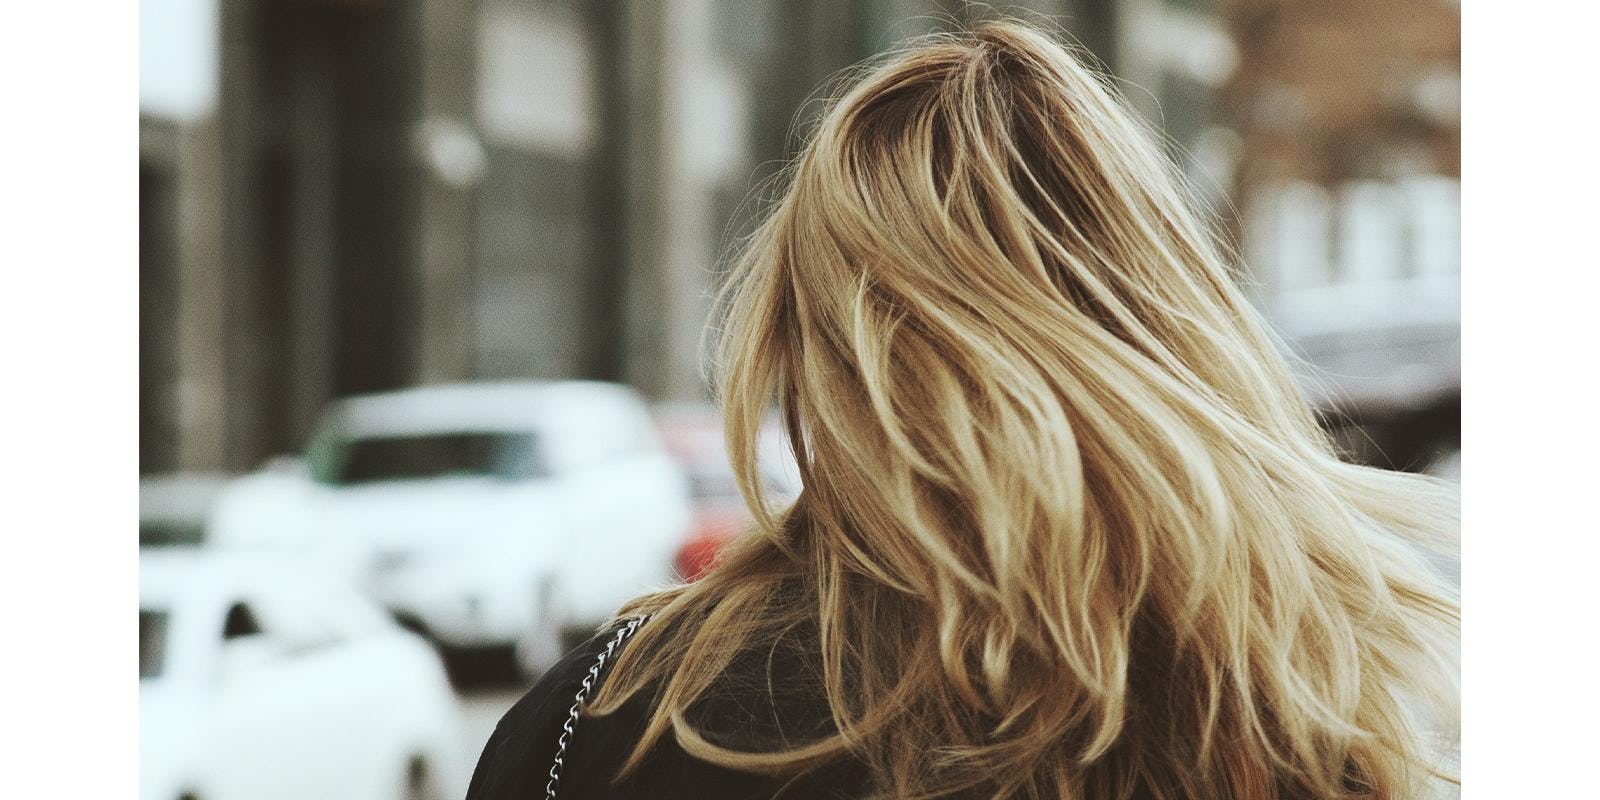 Why Is Blonde Hair Harder to Color and Maintain?